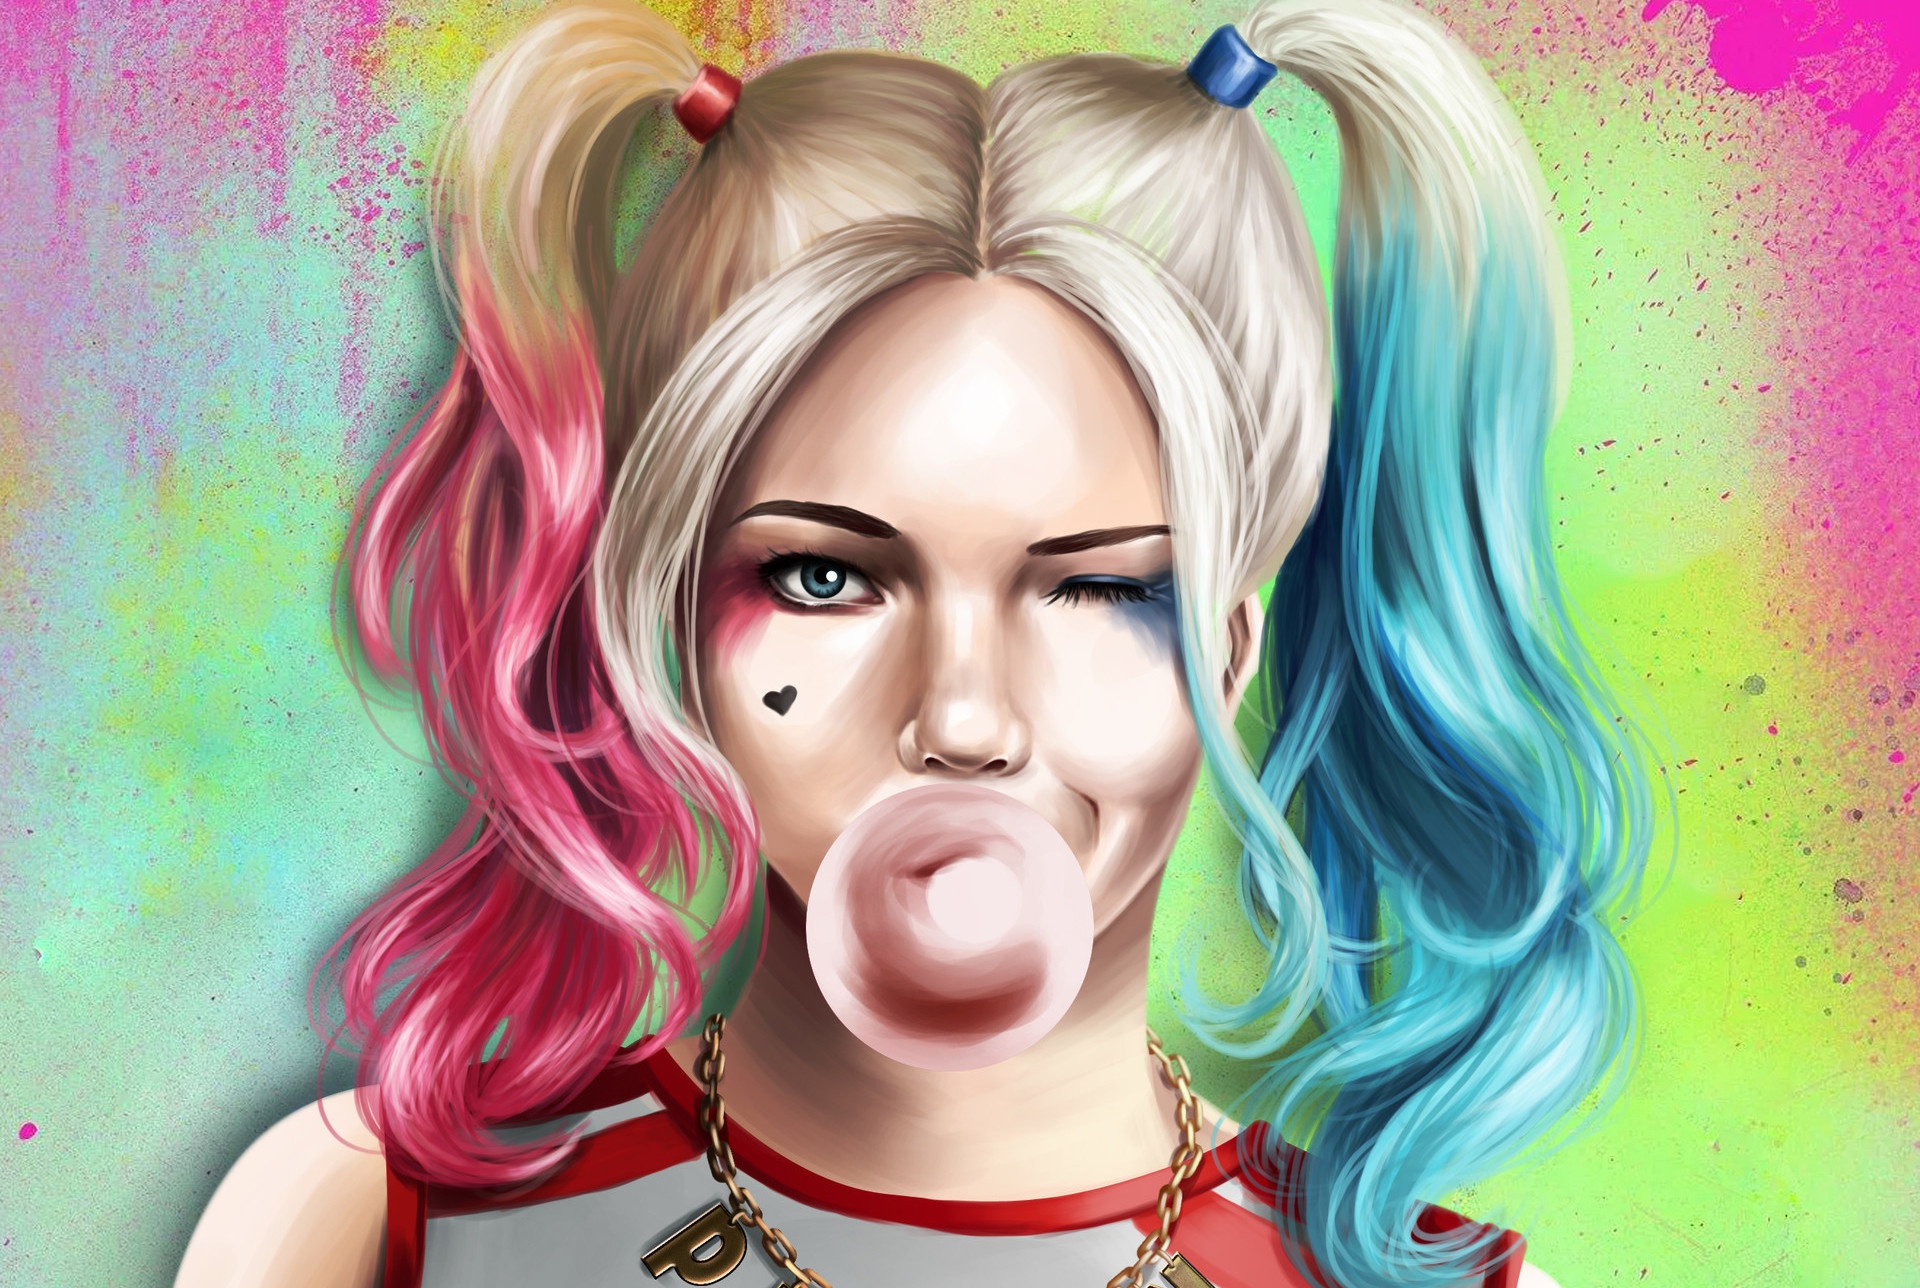 dc comics, harley quinn, suicide squad, movie, twintails, two toned hair, wink UHD